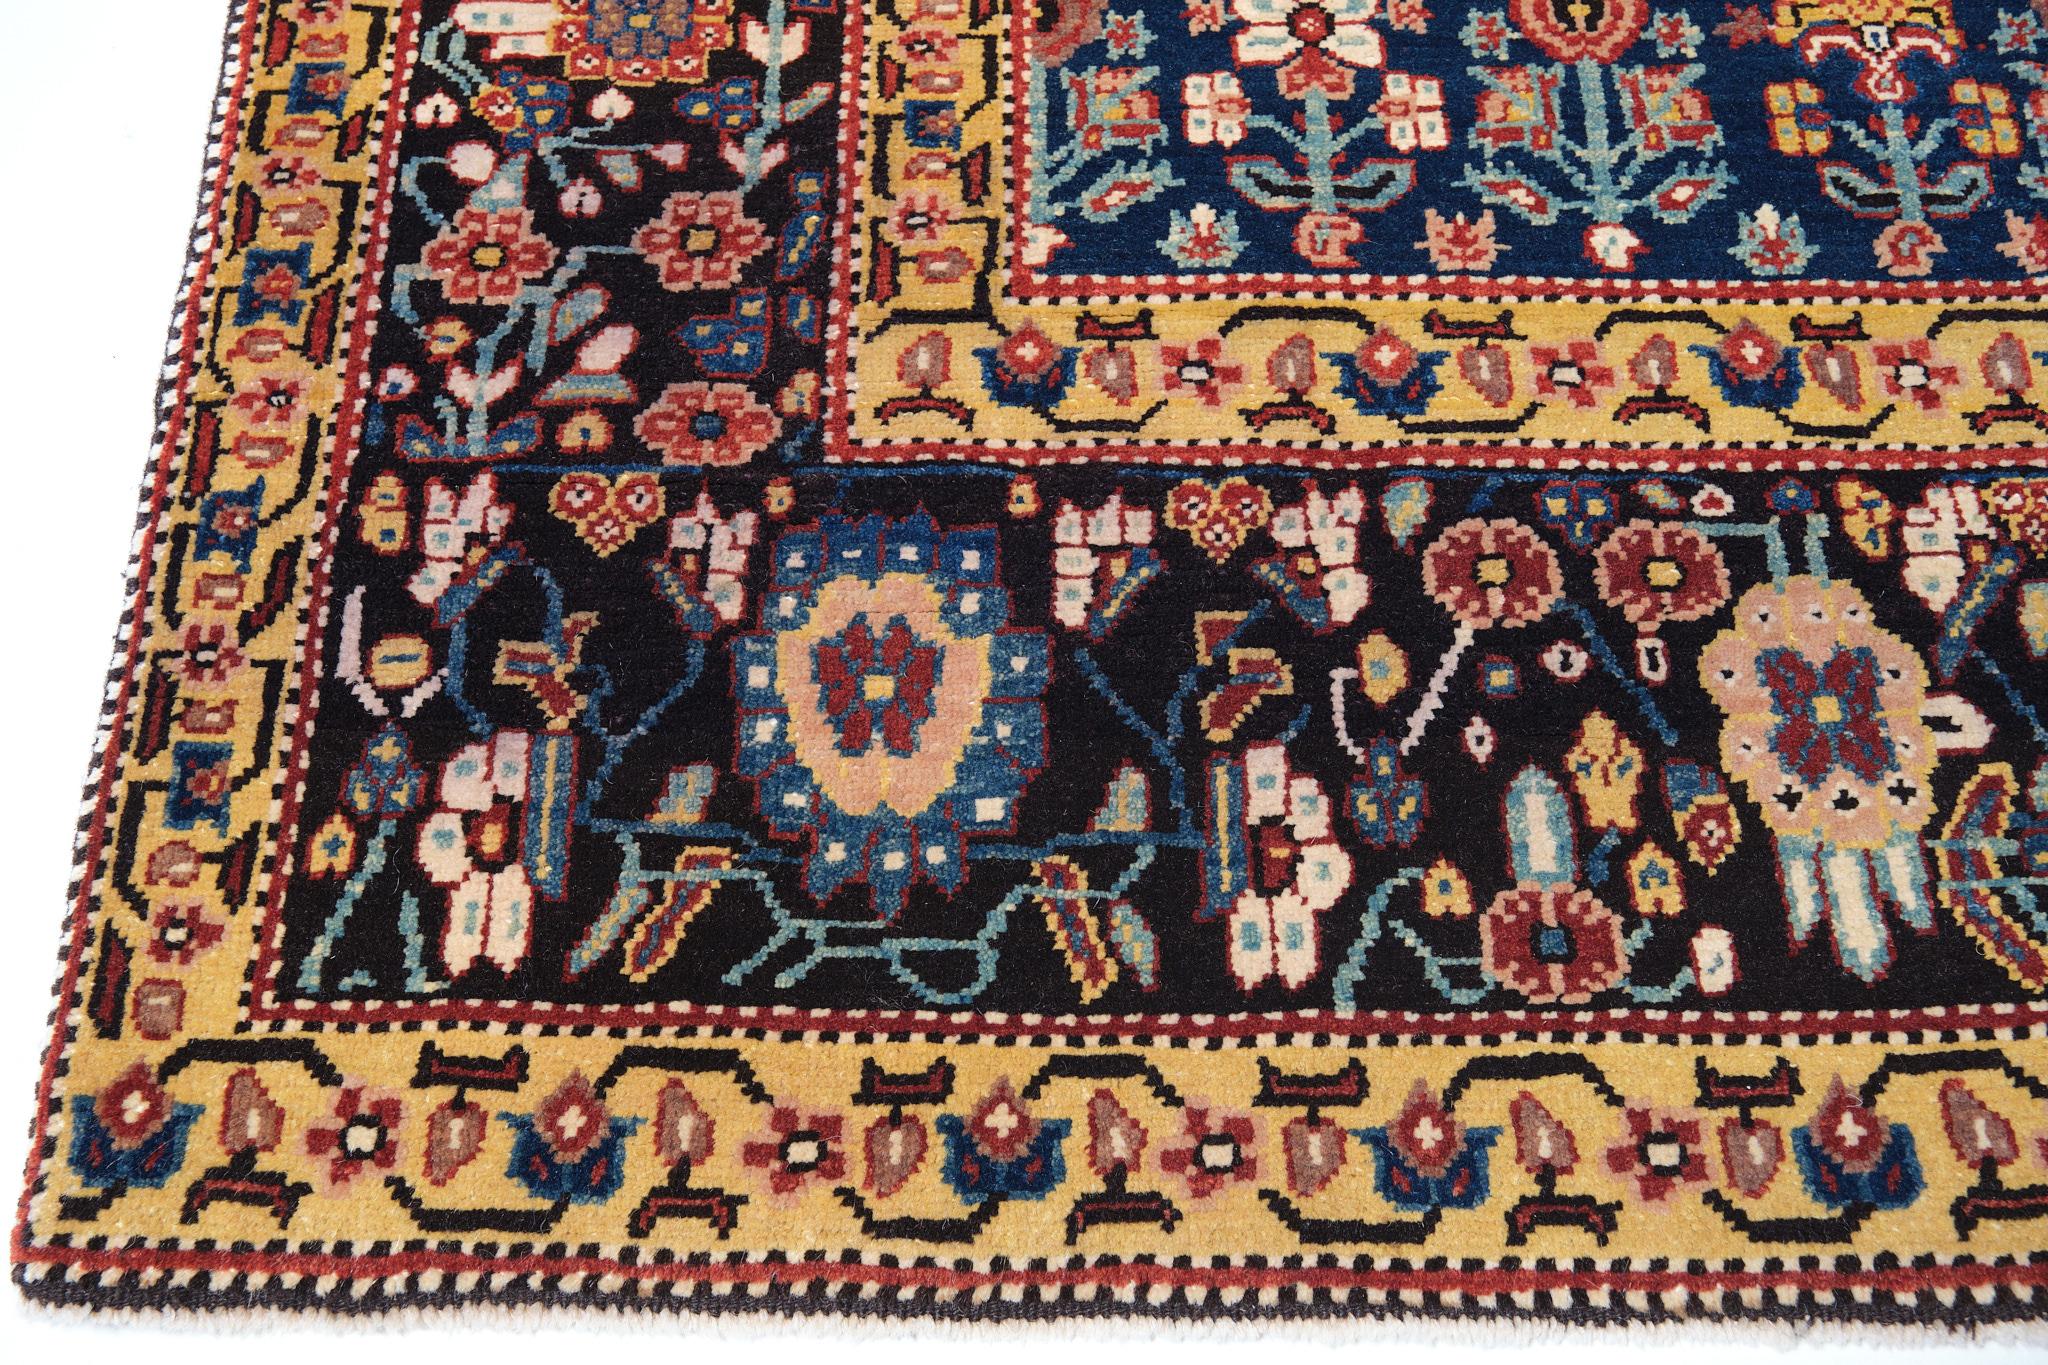 The source of the rug comes from the book Antique Rugs of Kurdistan A Historical Legacy of Woven Art, James D. Burns, 2002 nr.36 This was an exclusive example of offset rows of ascending flowers design rug c.1800s from Garrus, Eastern Kurdistan